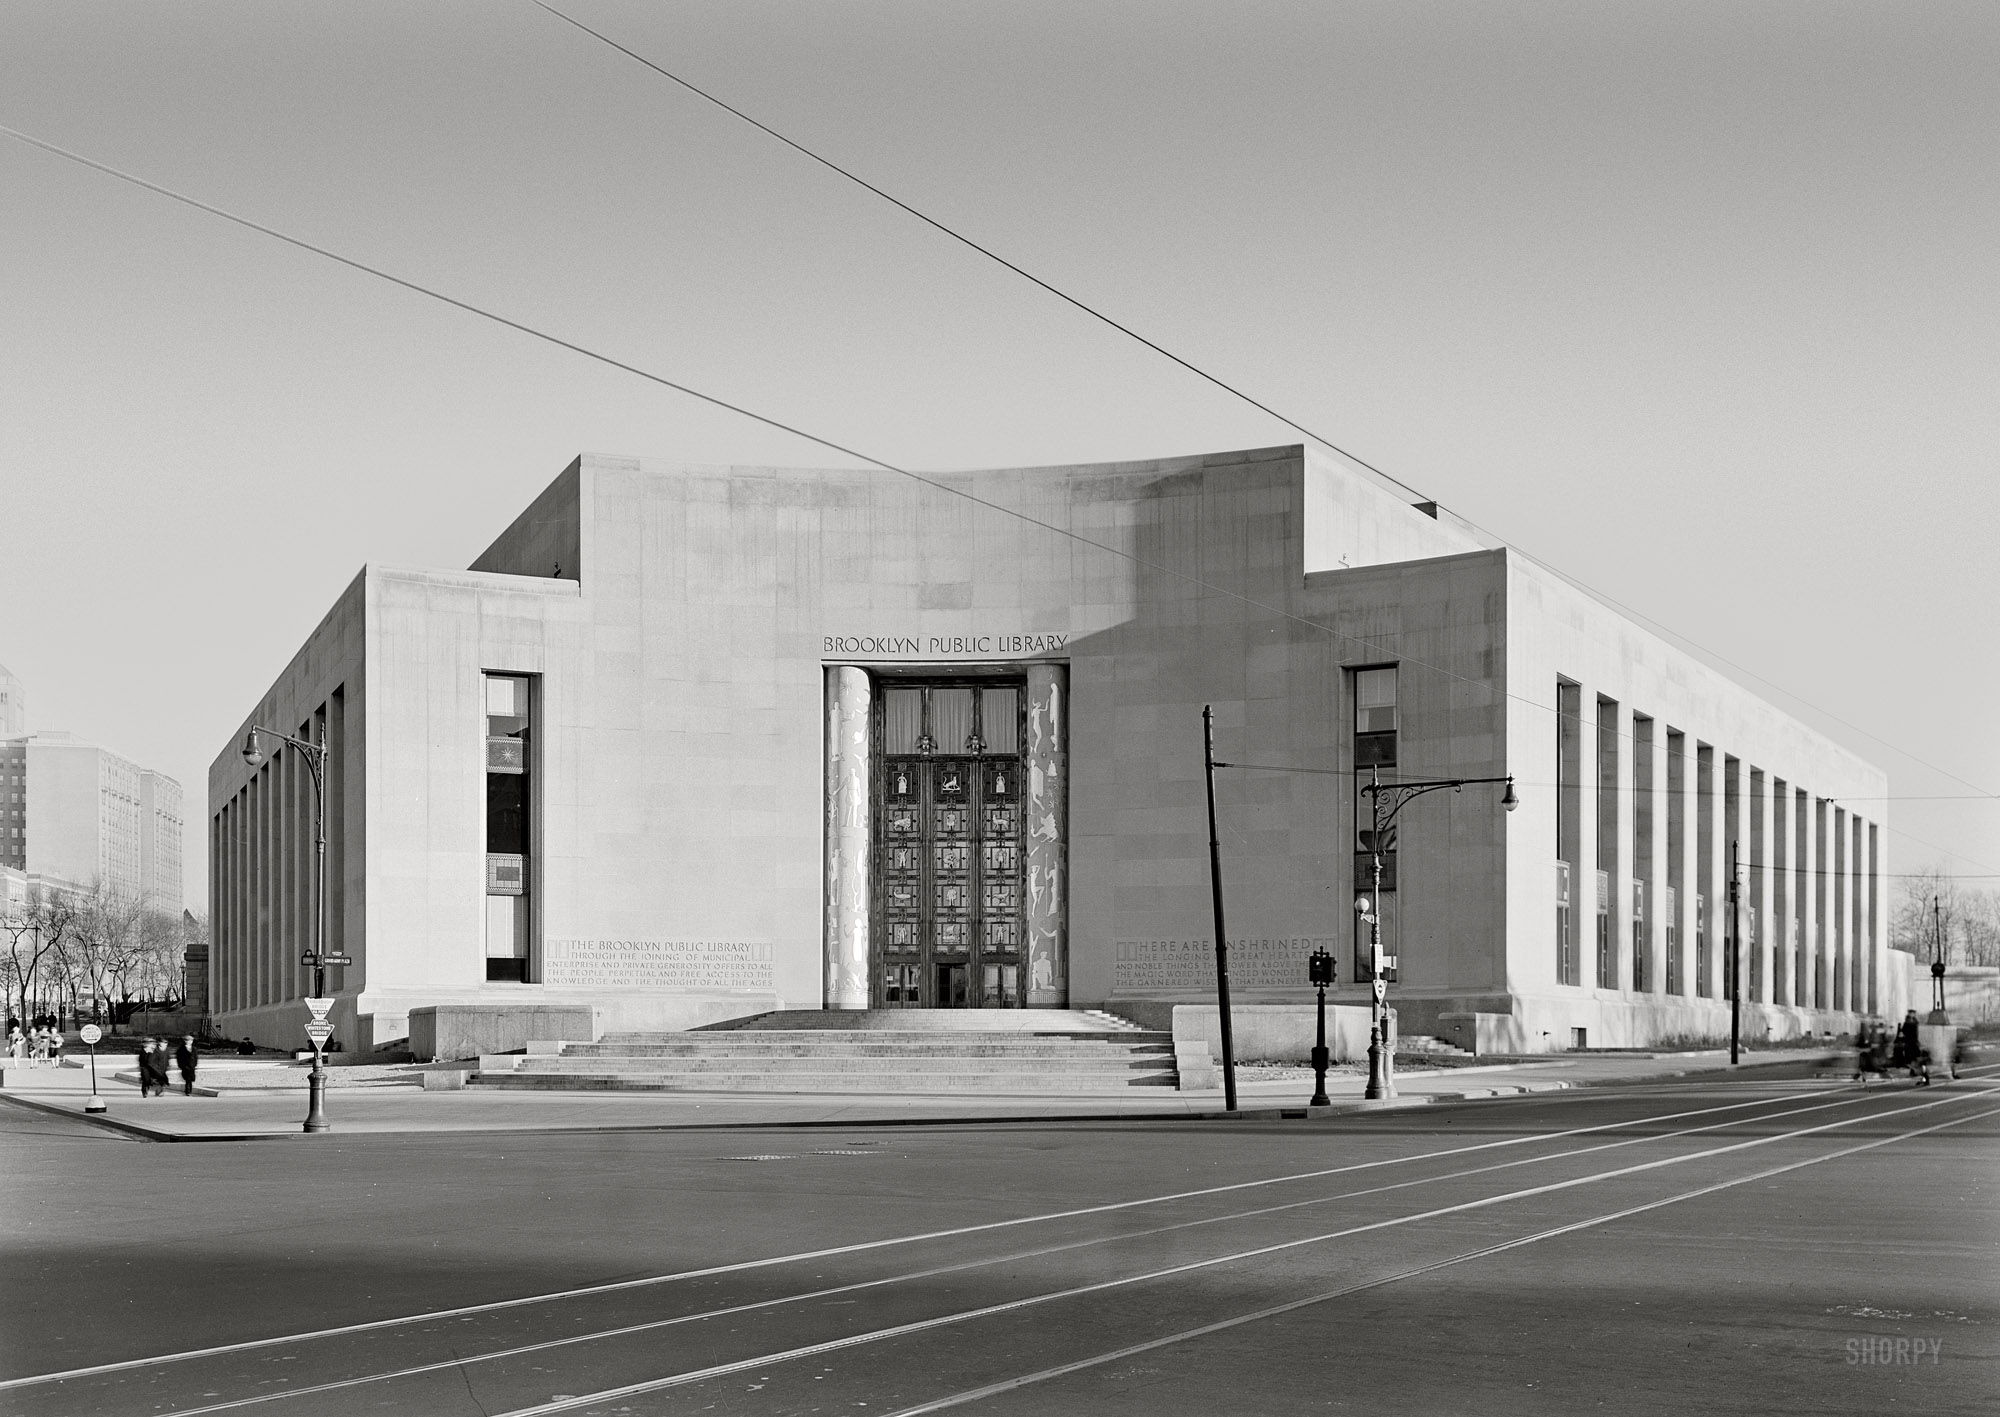 January 13, 1941. "Brooklyn Public Library (Ingersoll Memorial), Prospect Park Plaza, New York." Acetate negative by Gottscho-Schleisner. View full size.